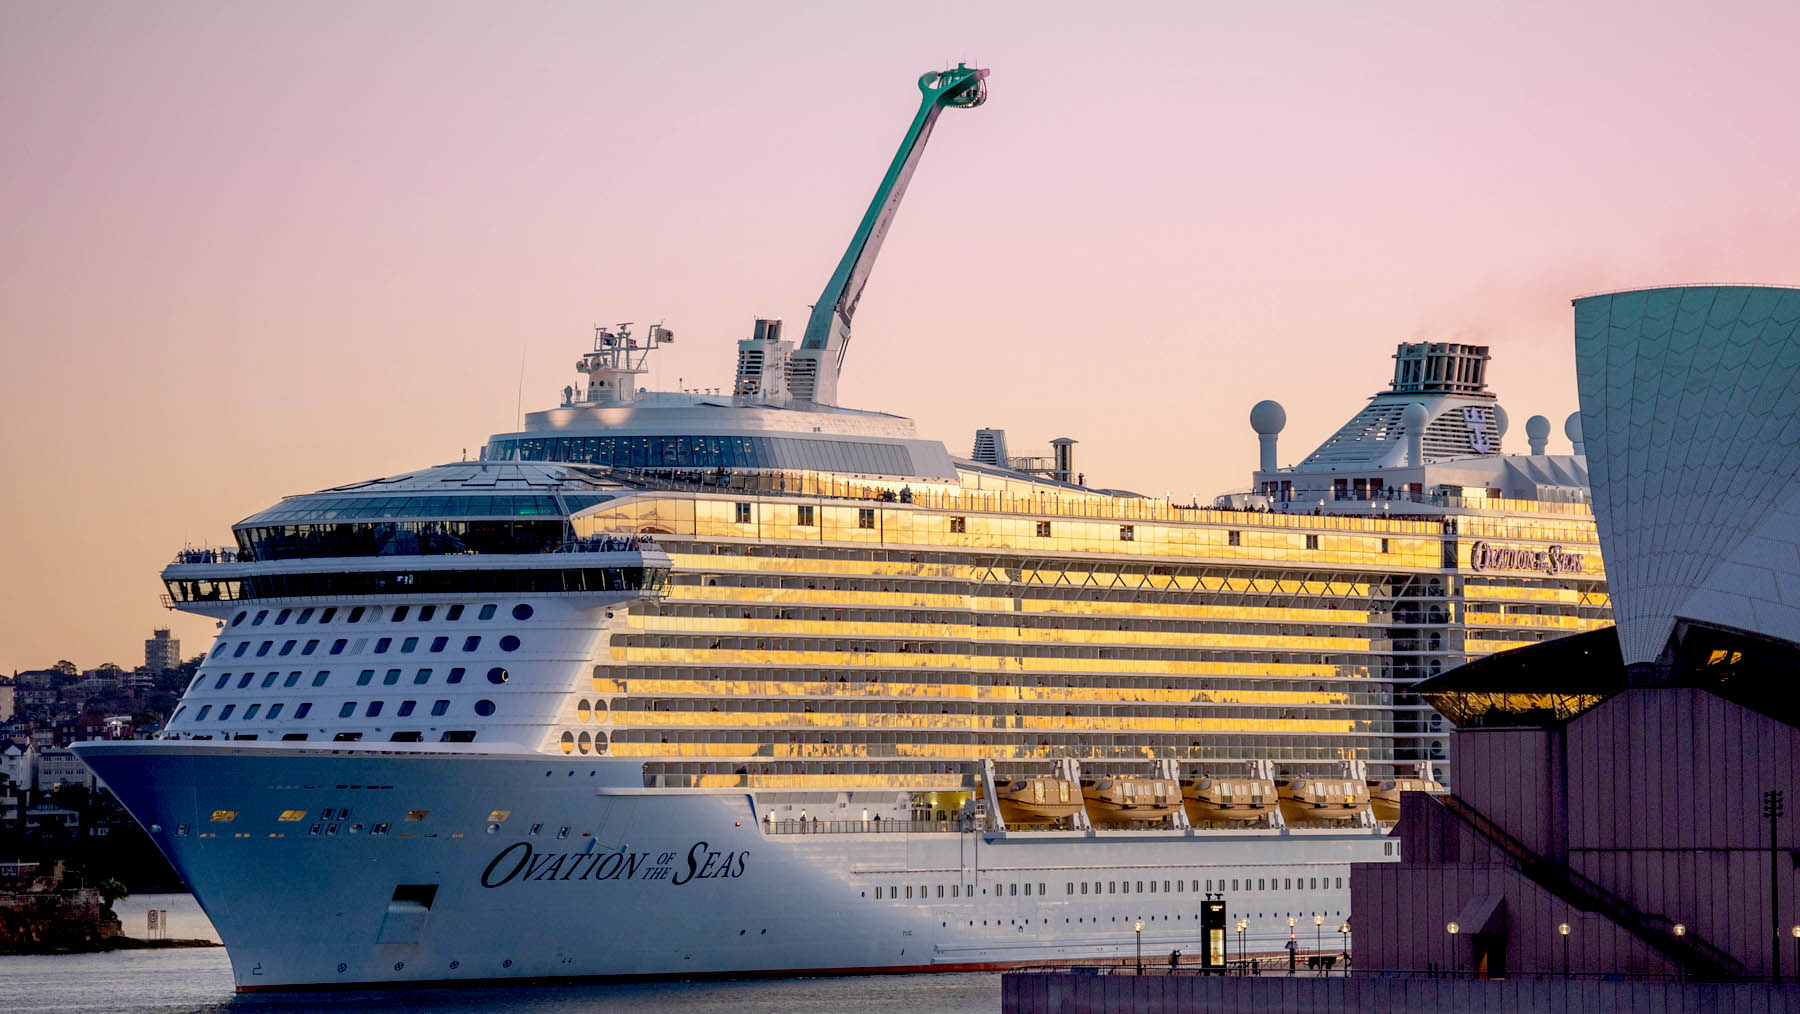 Royal Caribbean offers short cruises from Sydney onboard Ovation of the Seas.